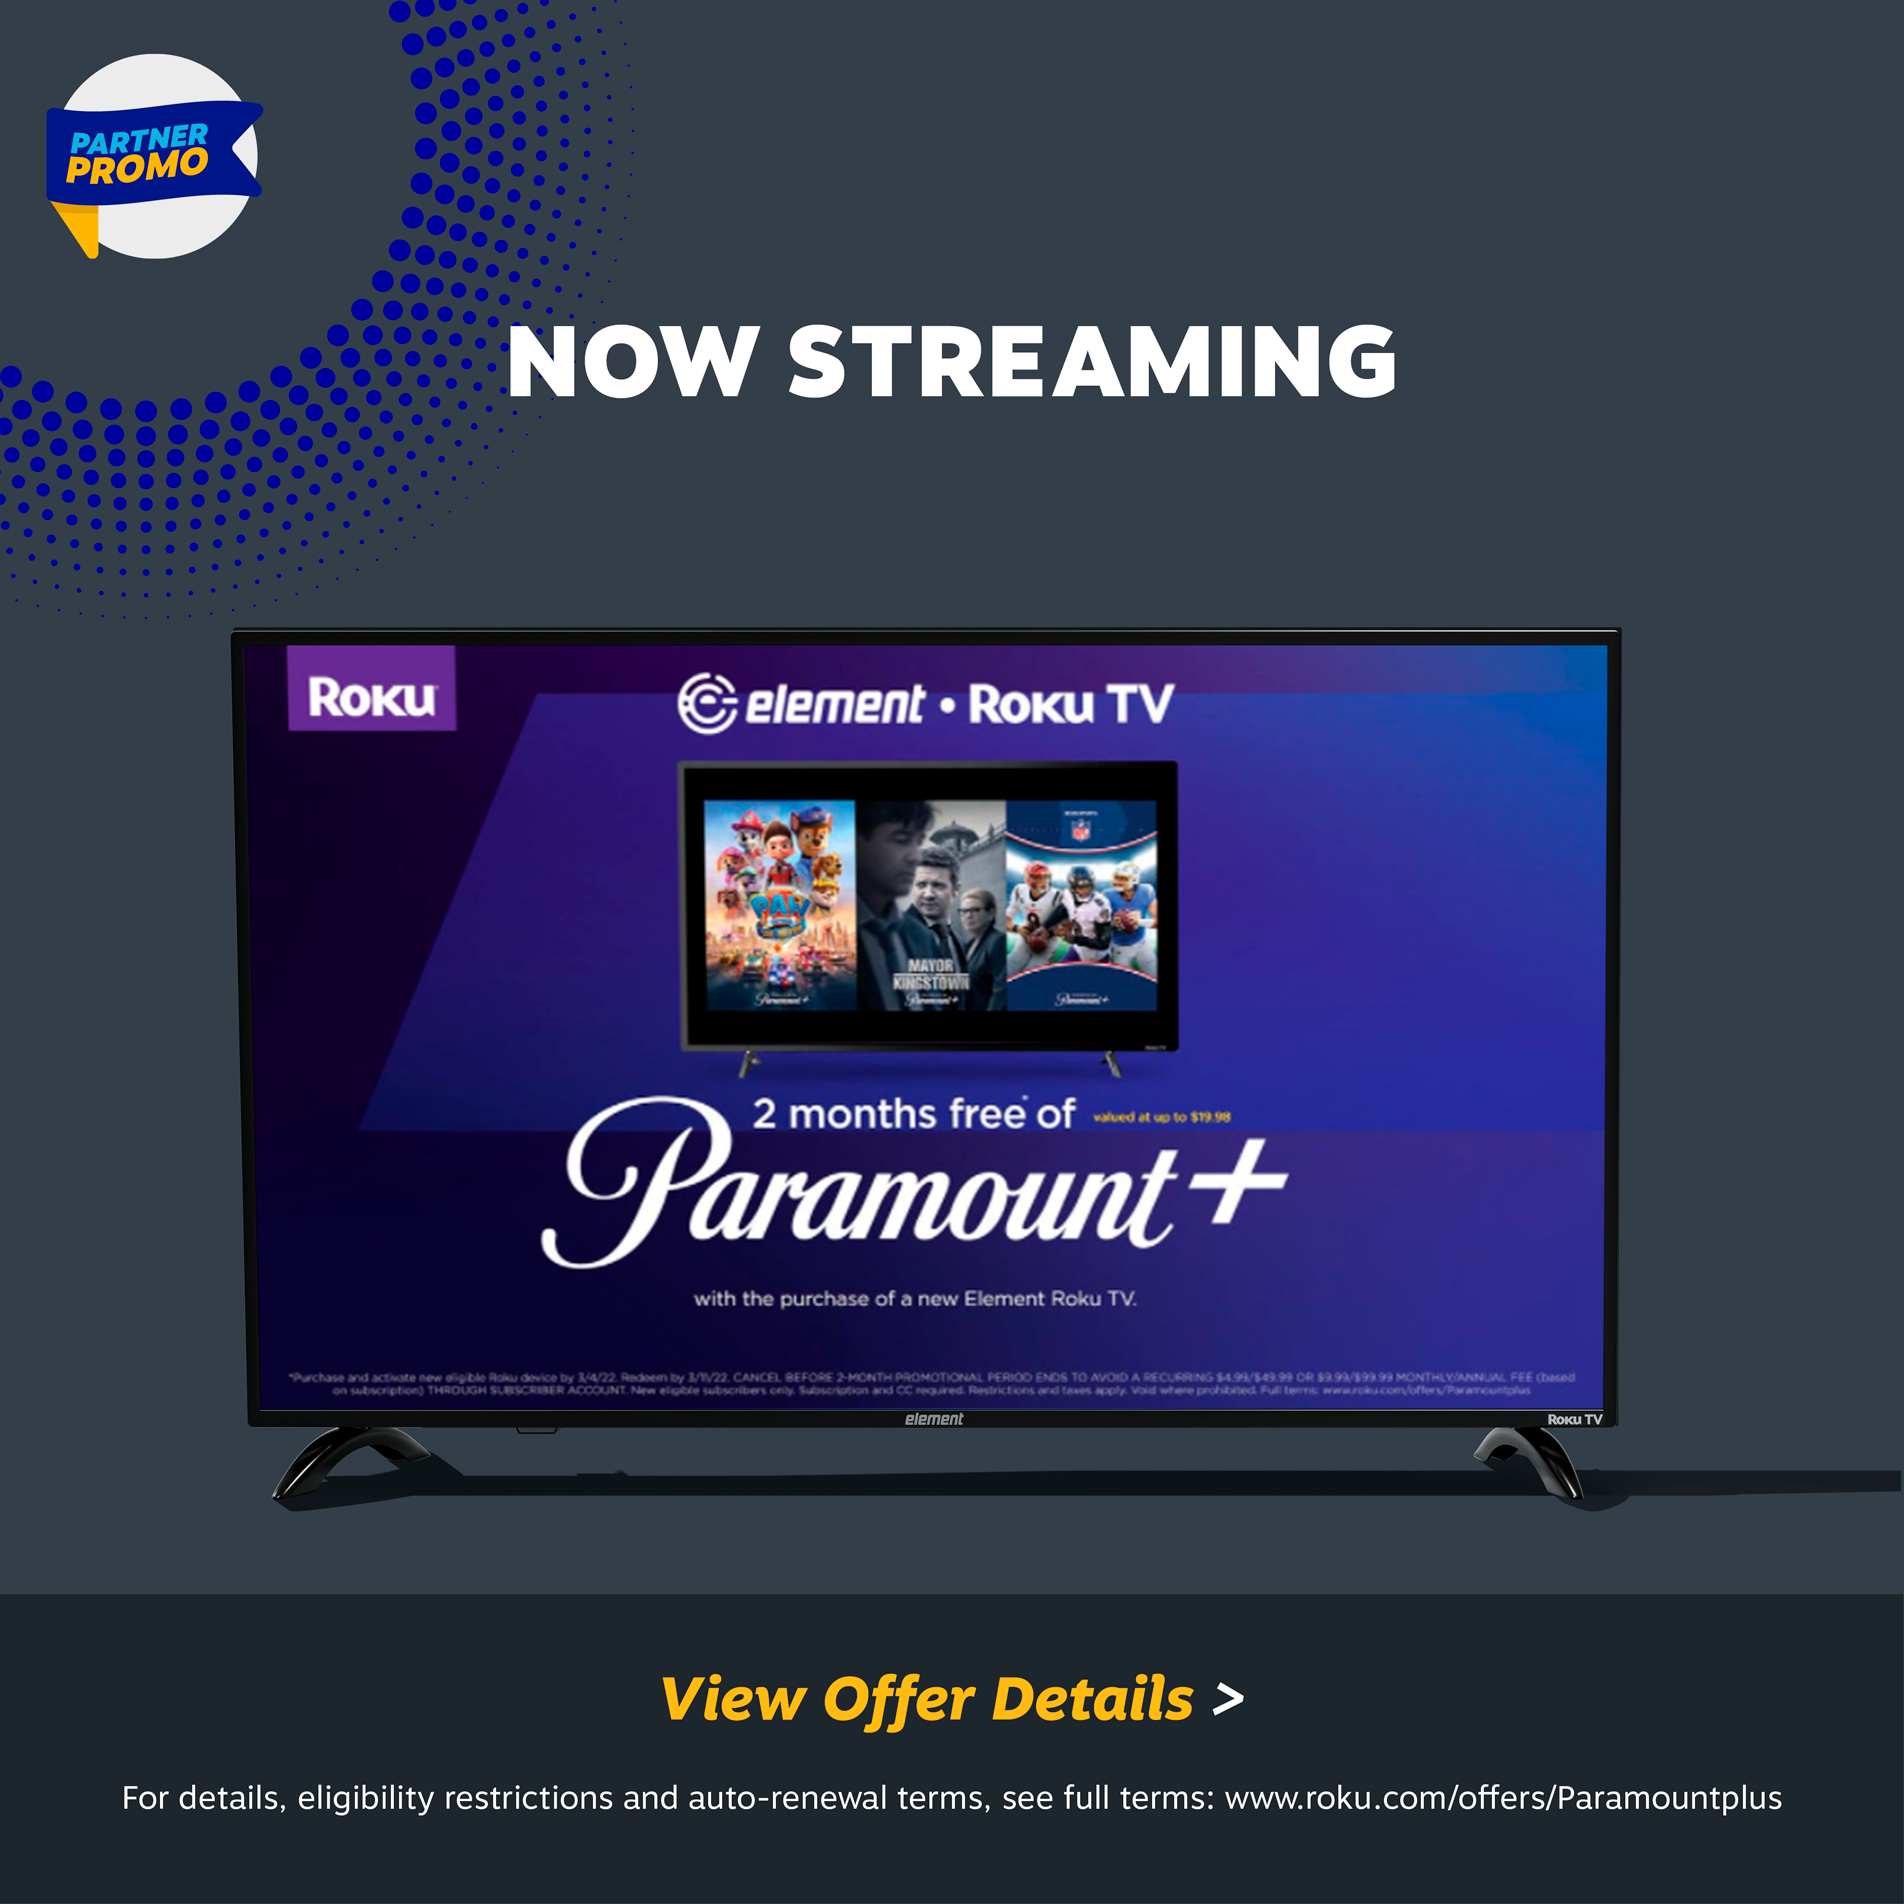 Roku x Paramount+ Promo - receive 2 months free of Paramount+ when you purchase and activate a new Element Roku TV